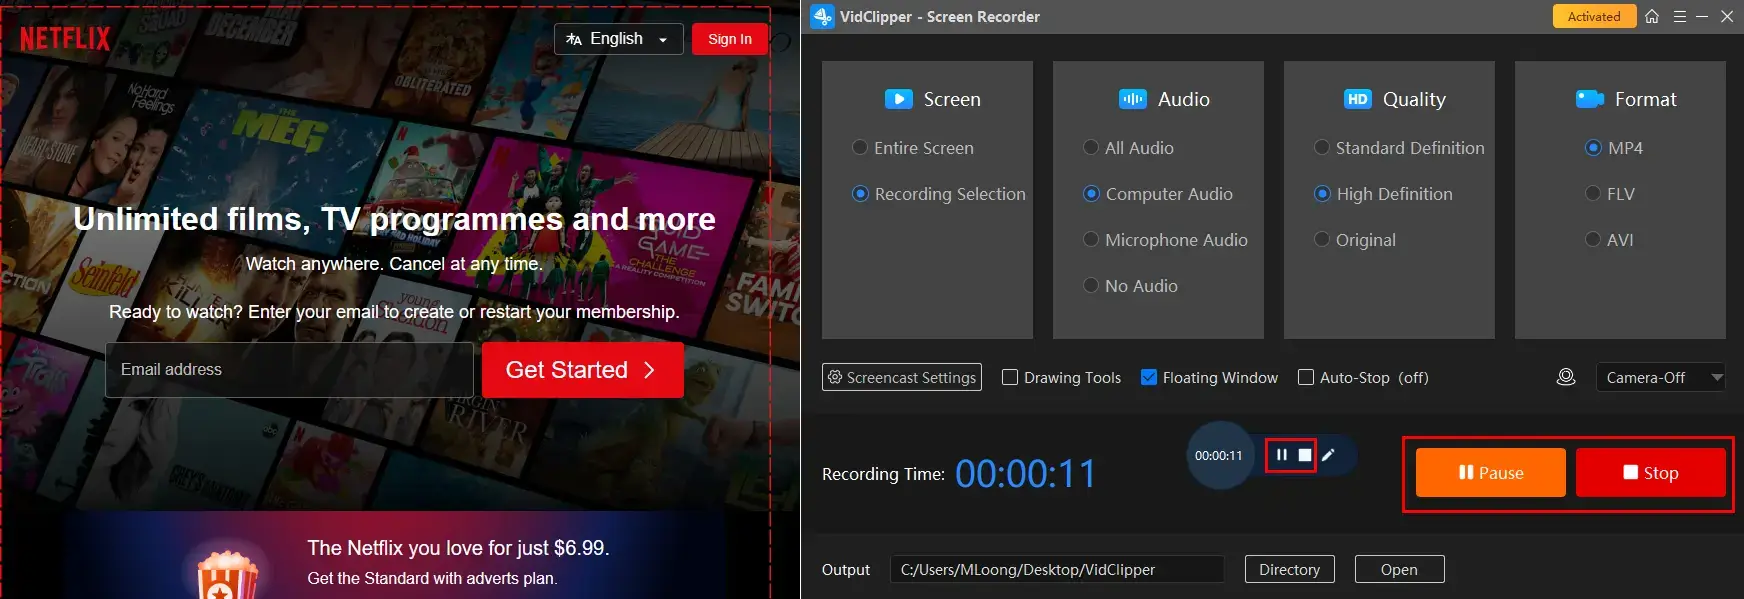 how to screen record on netflix with workintool capture screen recorder 2